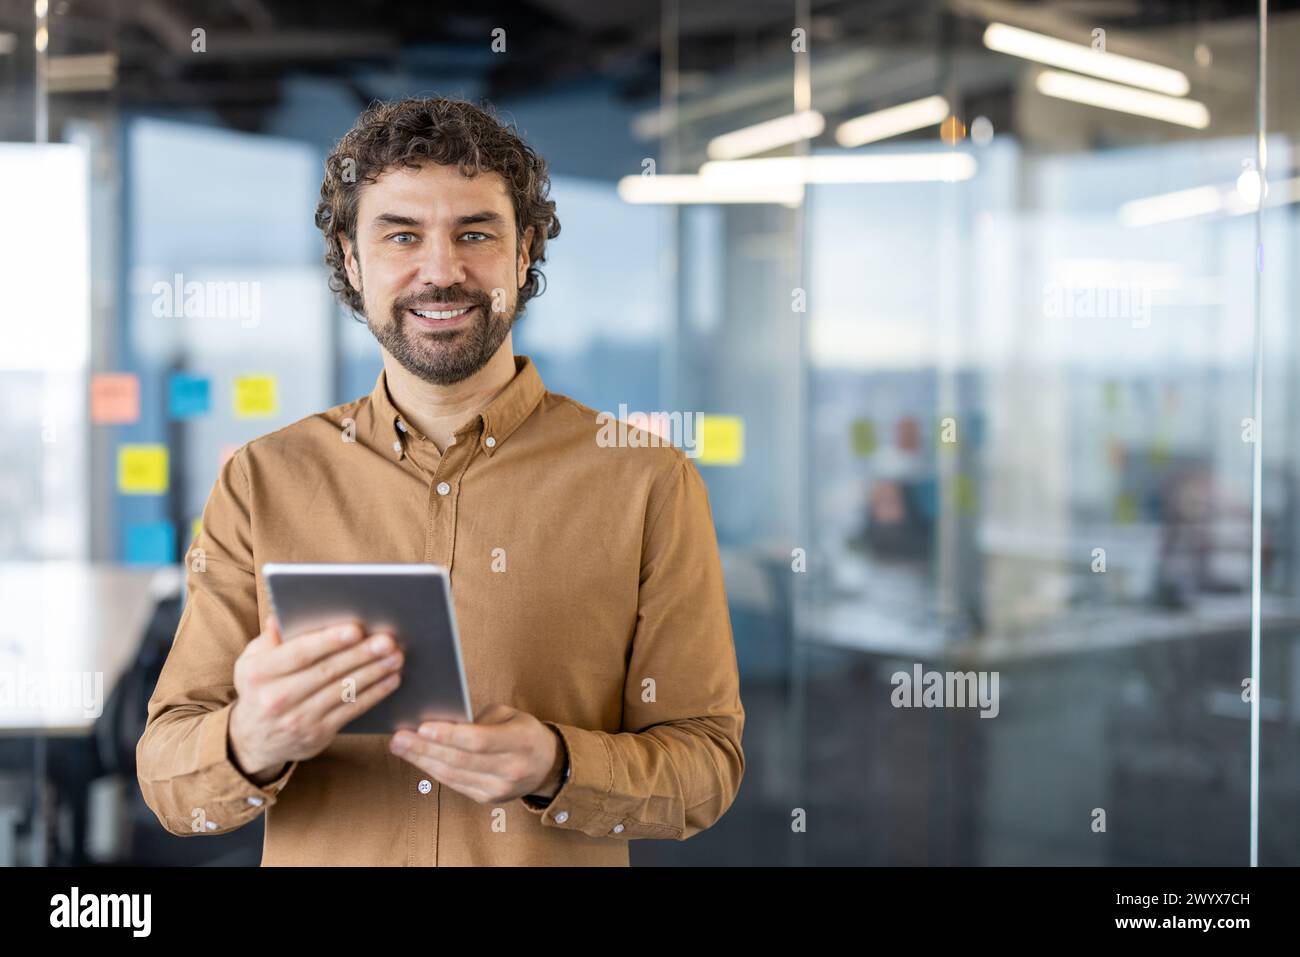 Portrait of a mature Hispanic businessman smiling confidently while holding a digital tablet in an office setting with glass walls. Stock Photo